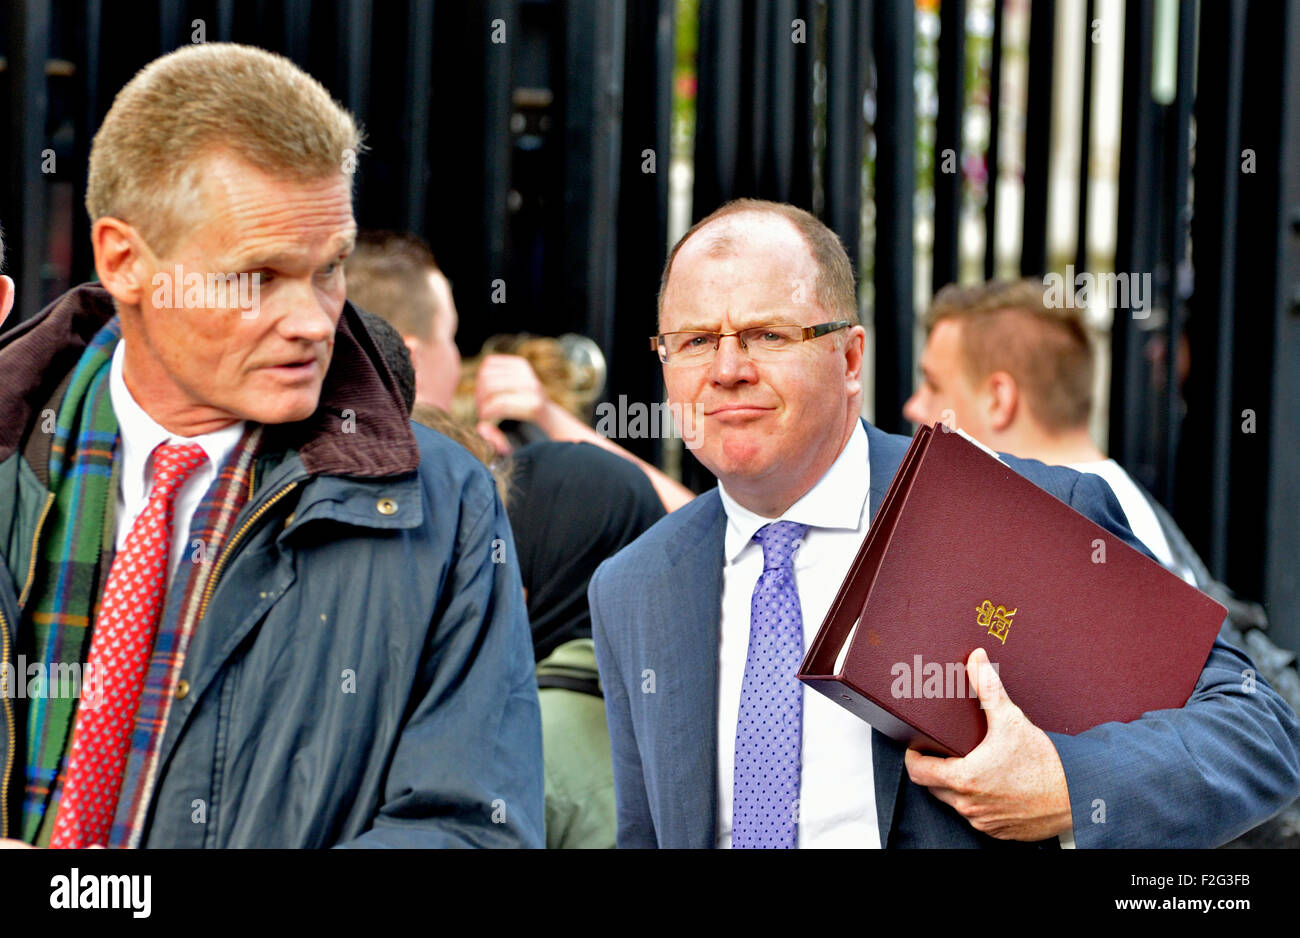 George Freeman MP leaving Downing Street - Conservative Member of Parliament for Mid Norfolk (since 2010) Life Sciences minister Stock Photo